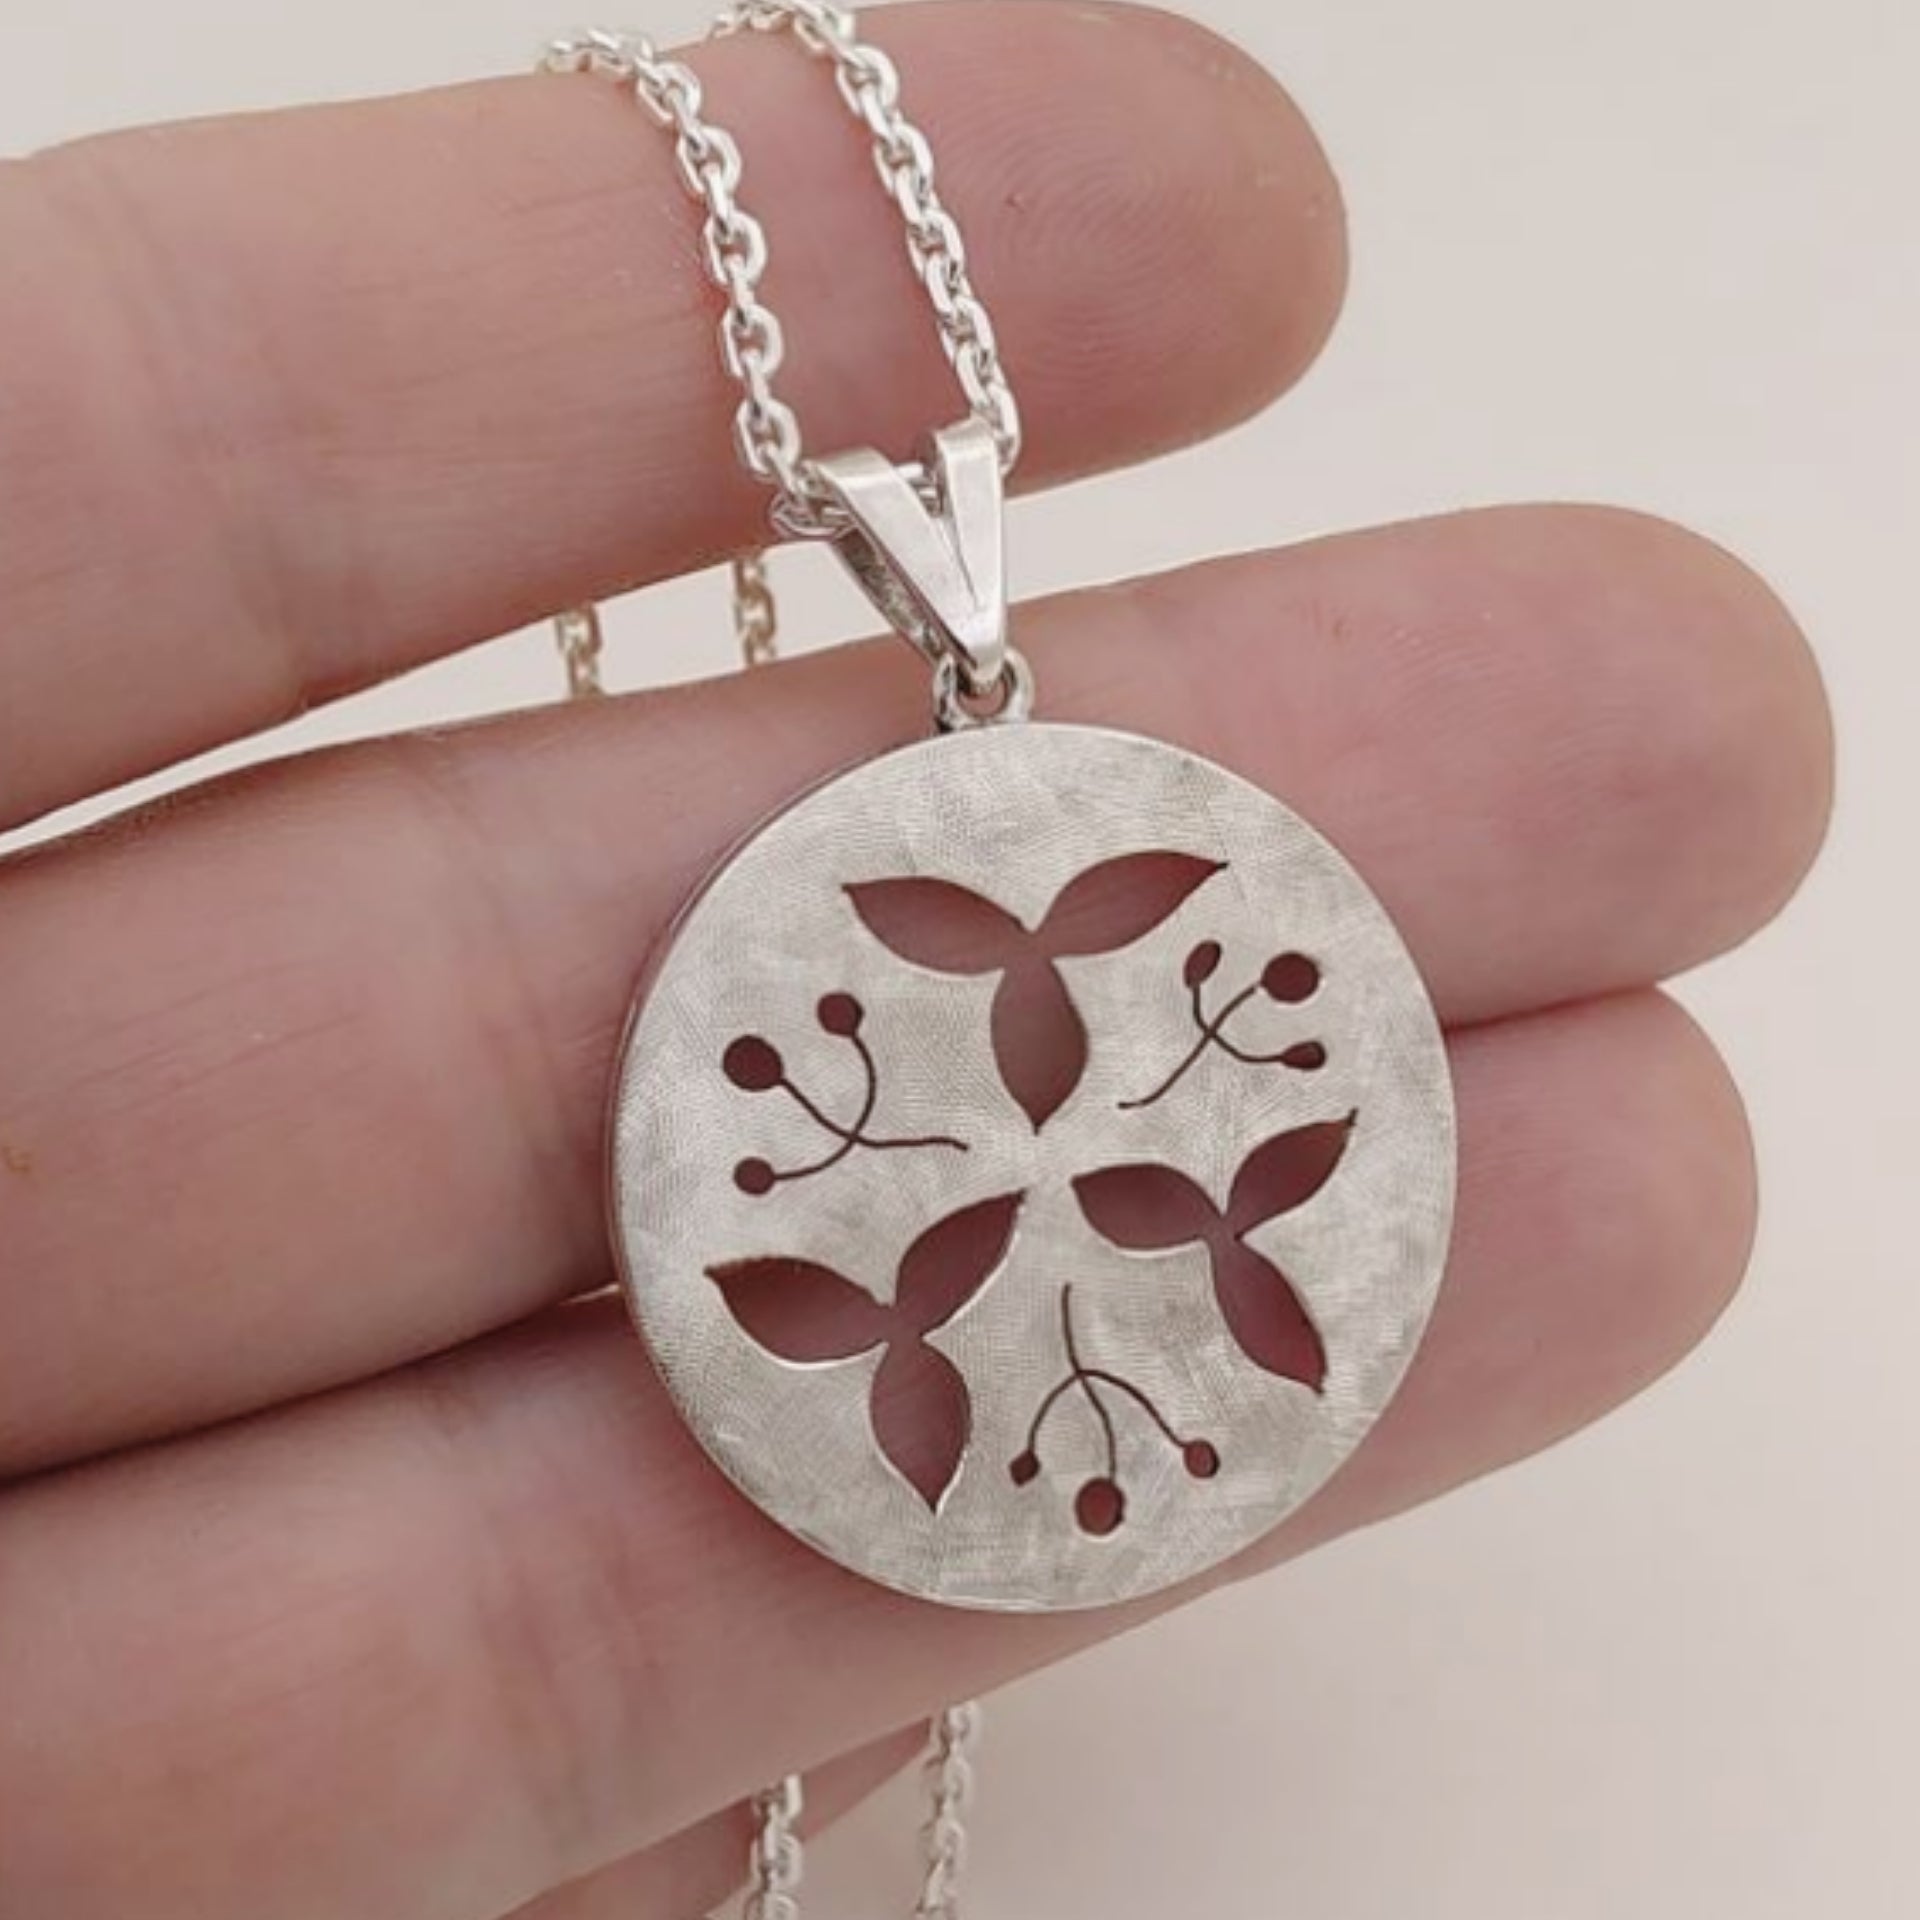 A round silver pendant in which floral and leave patterns are cut. Made by hand by Casez Jewellery.